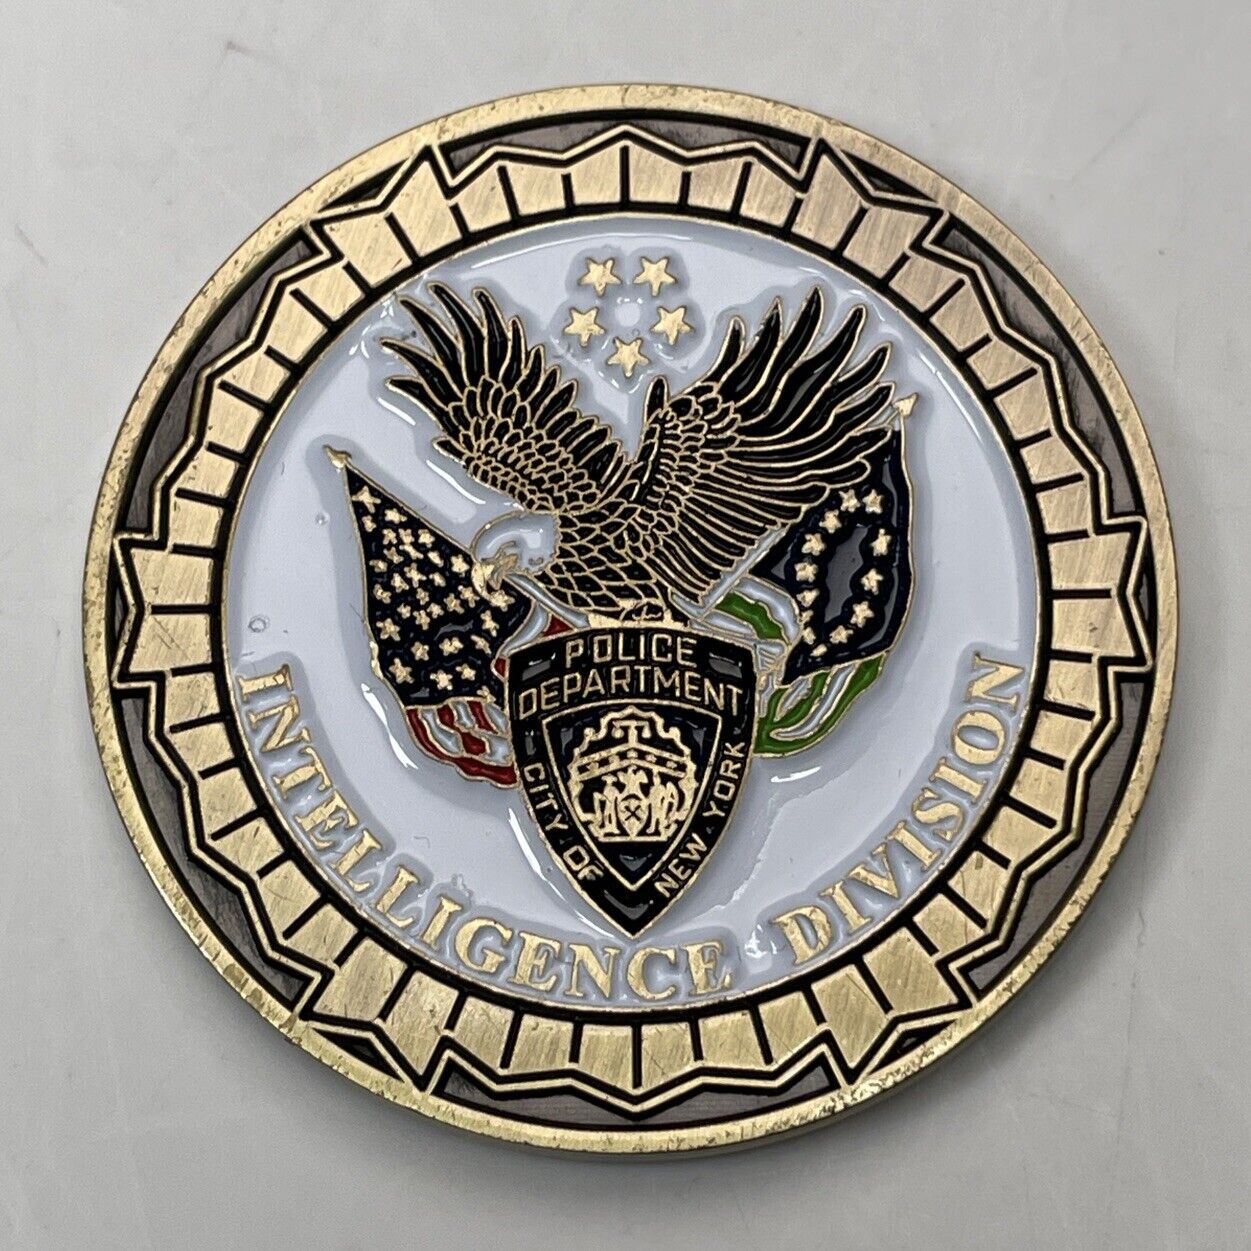 New York Intelligence Division Leads Investigation Unit Challenge Coin NYPD 9-11